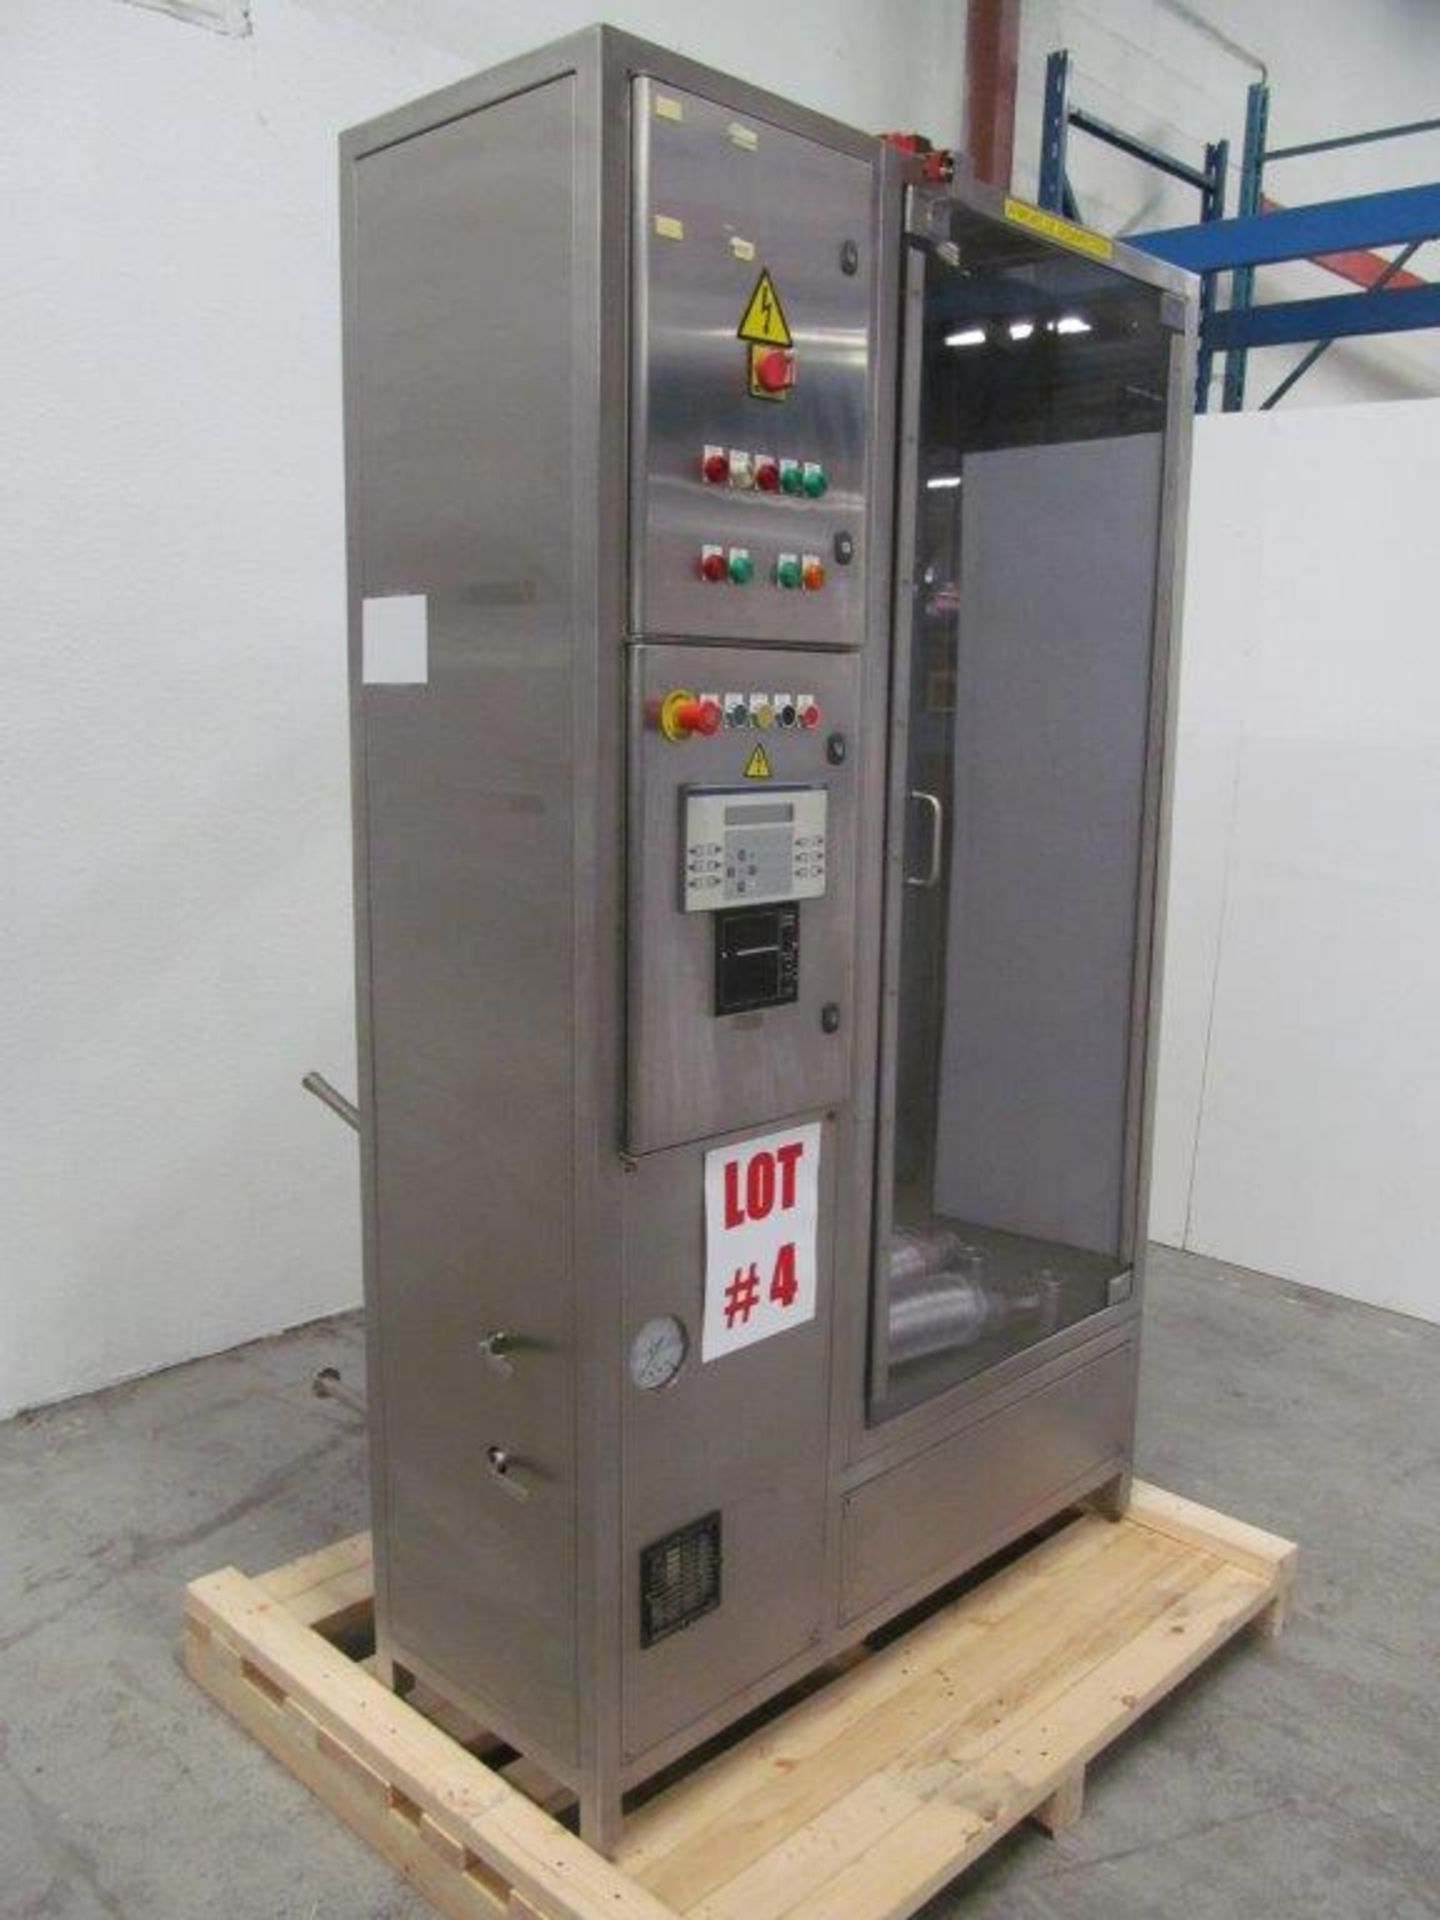 SOLERI THERMAL DESINFECTION CABINET, 200 HOURS, YEAR: 1999, 170 VOLTS, DIMENSION: 4X3X8, WEIGHT: 800 - Image 2 of 6